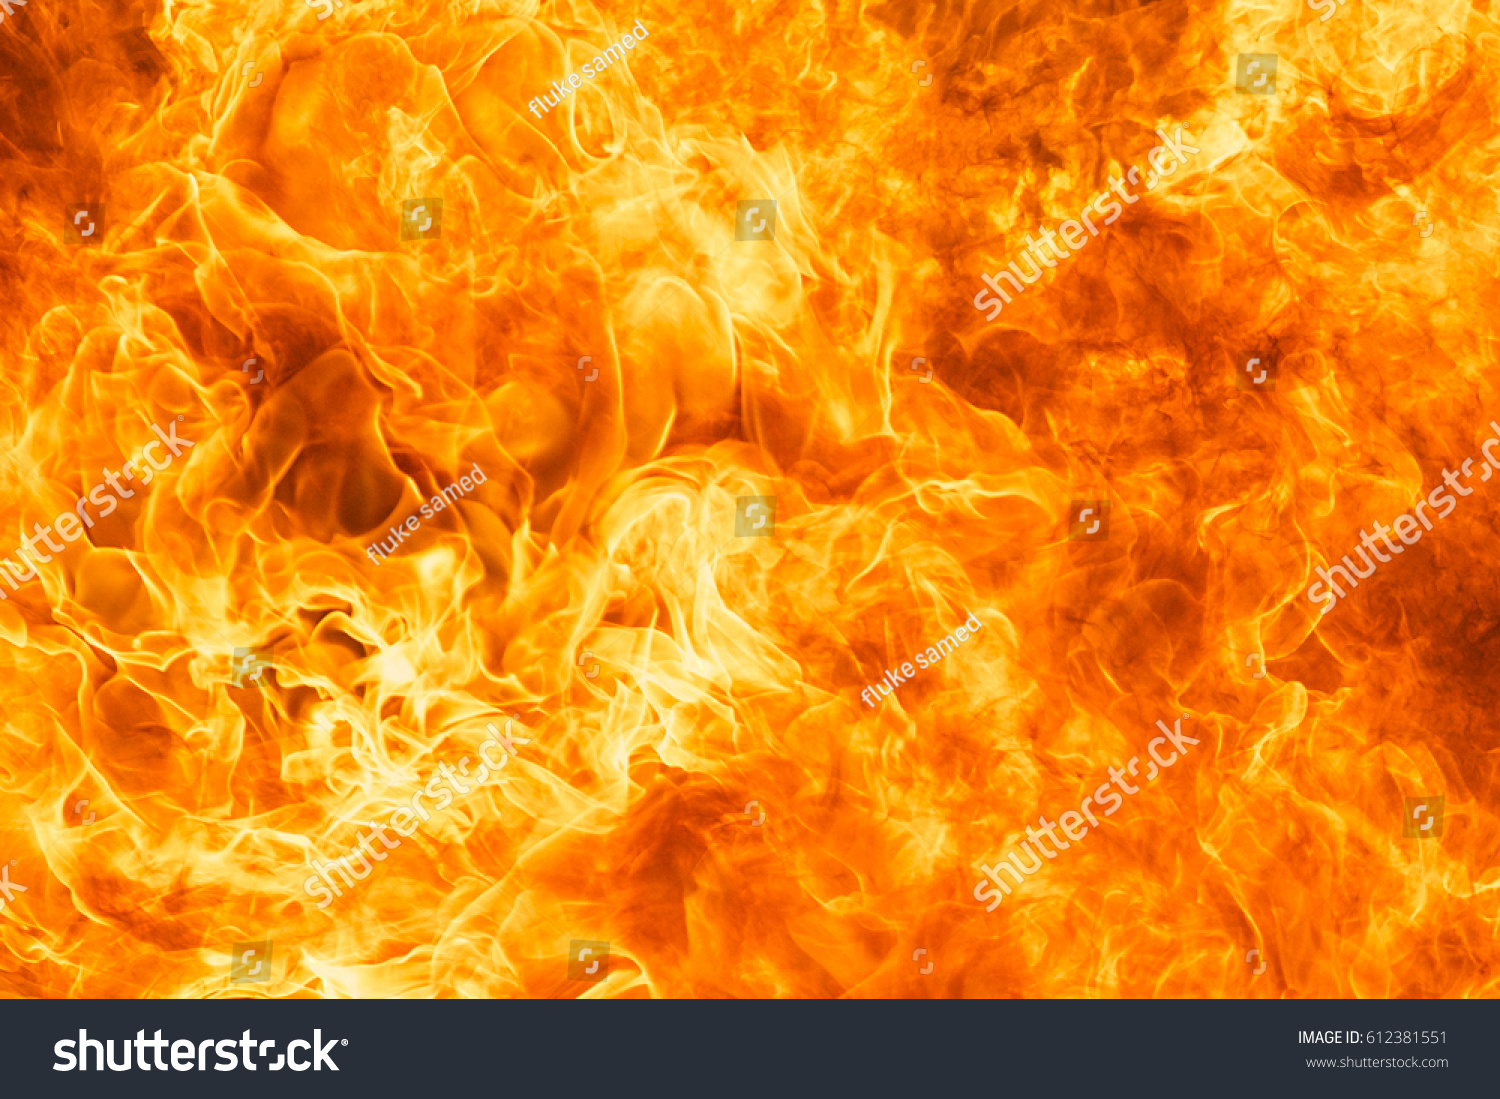 abstract blaze fire flame texture background #612381551